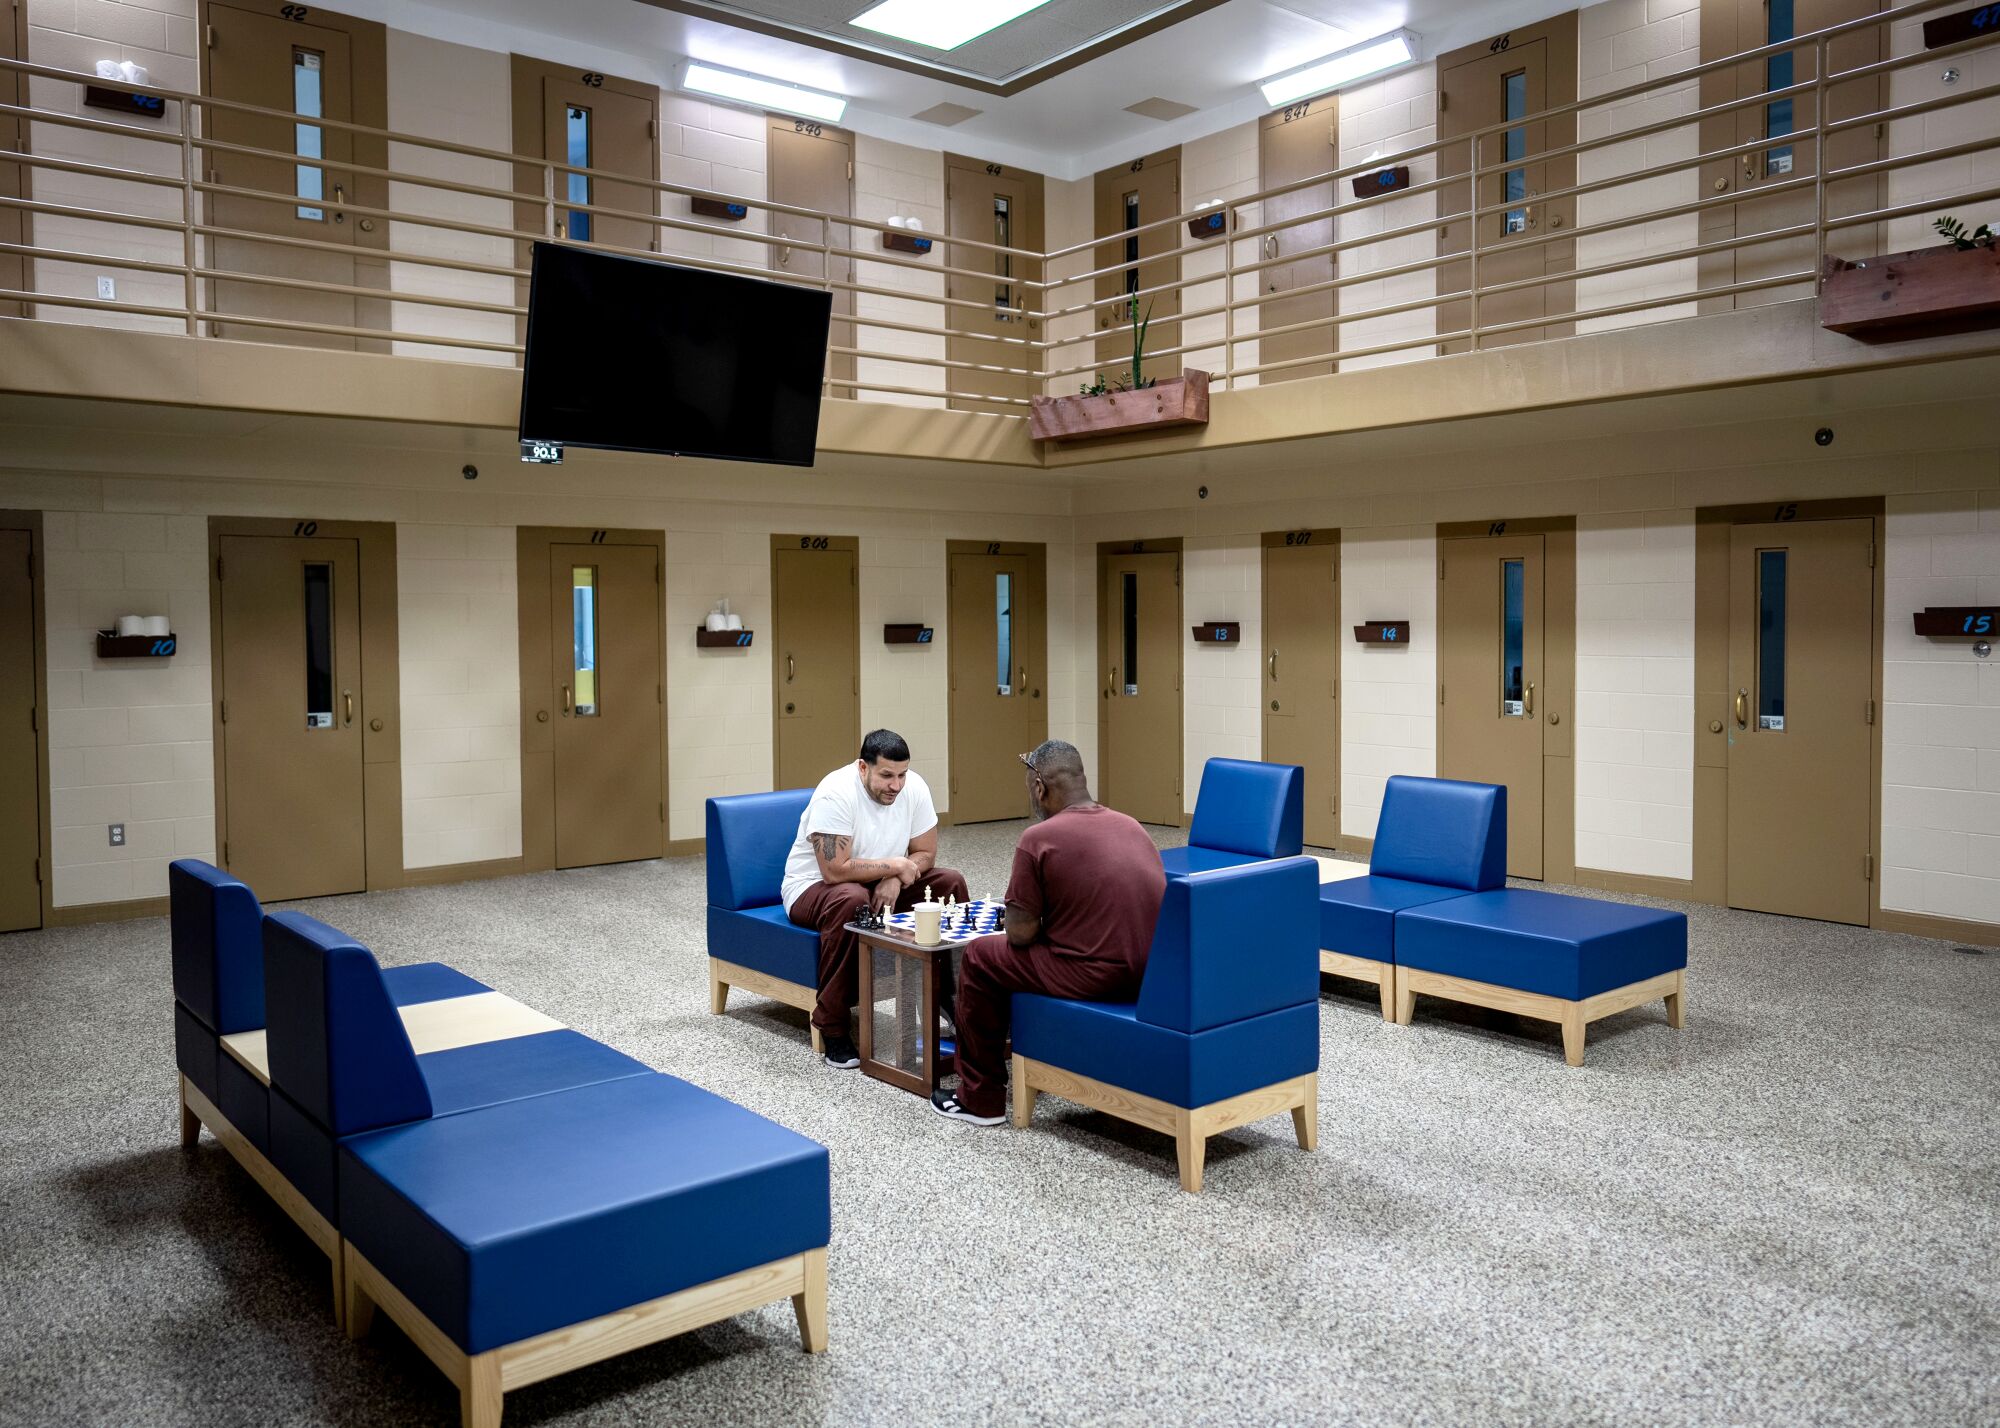 Two inmates sit in the center of a prison  block and play chess. A TV is mounted on railing of second floor of cell units.